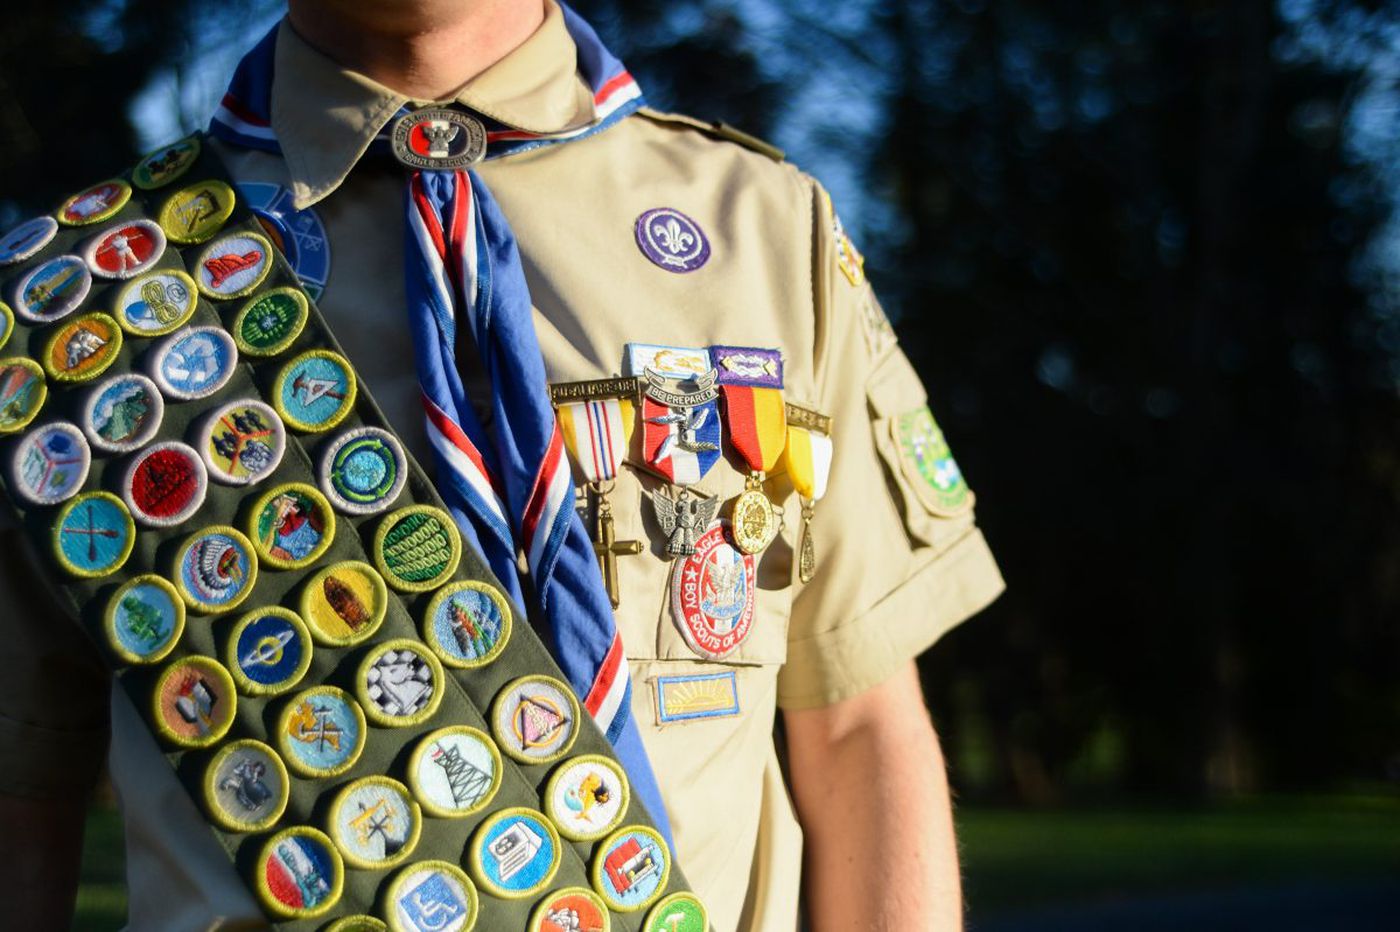 University of Scouting Cascade Pacific Council, Boy Scouts of America